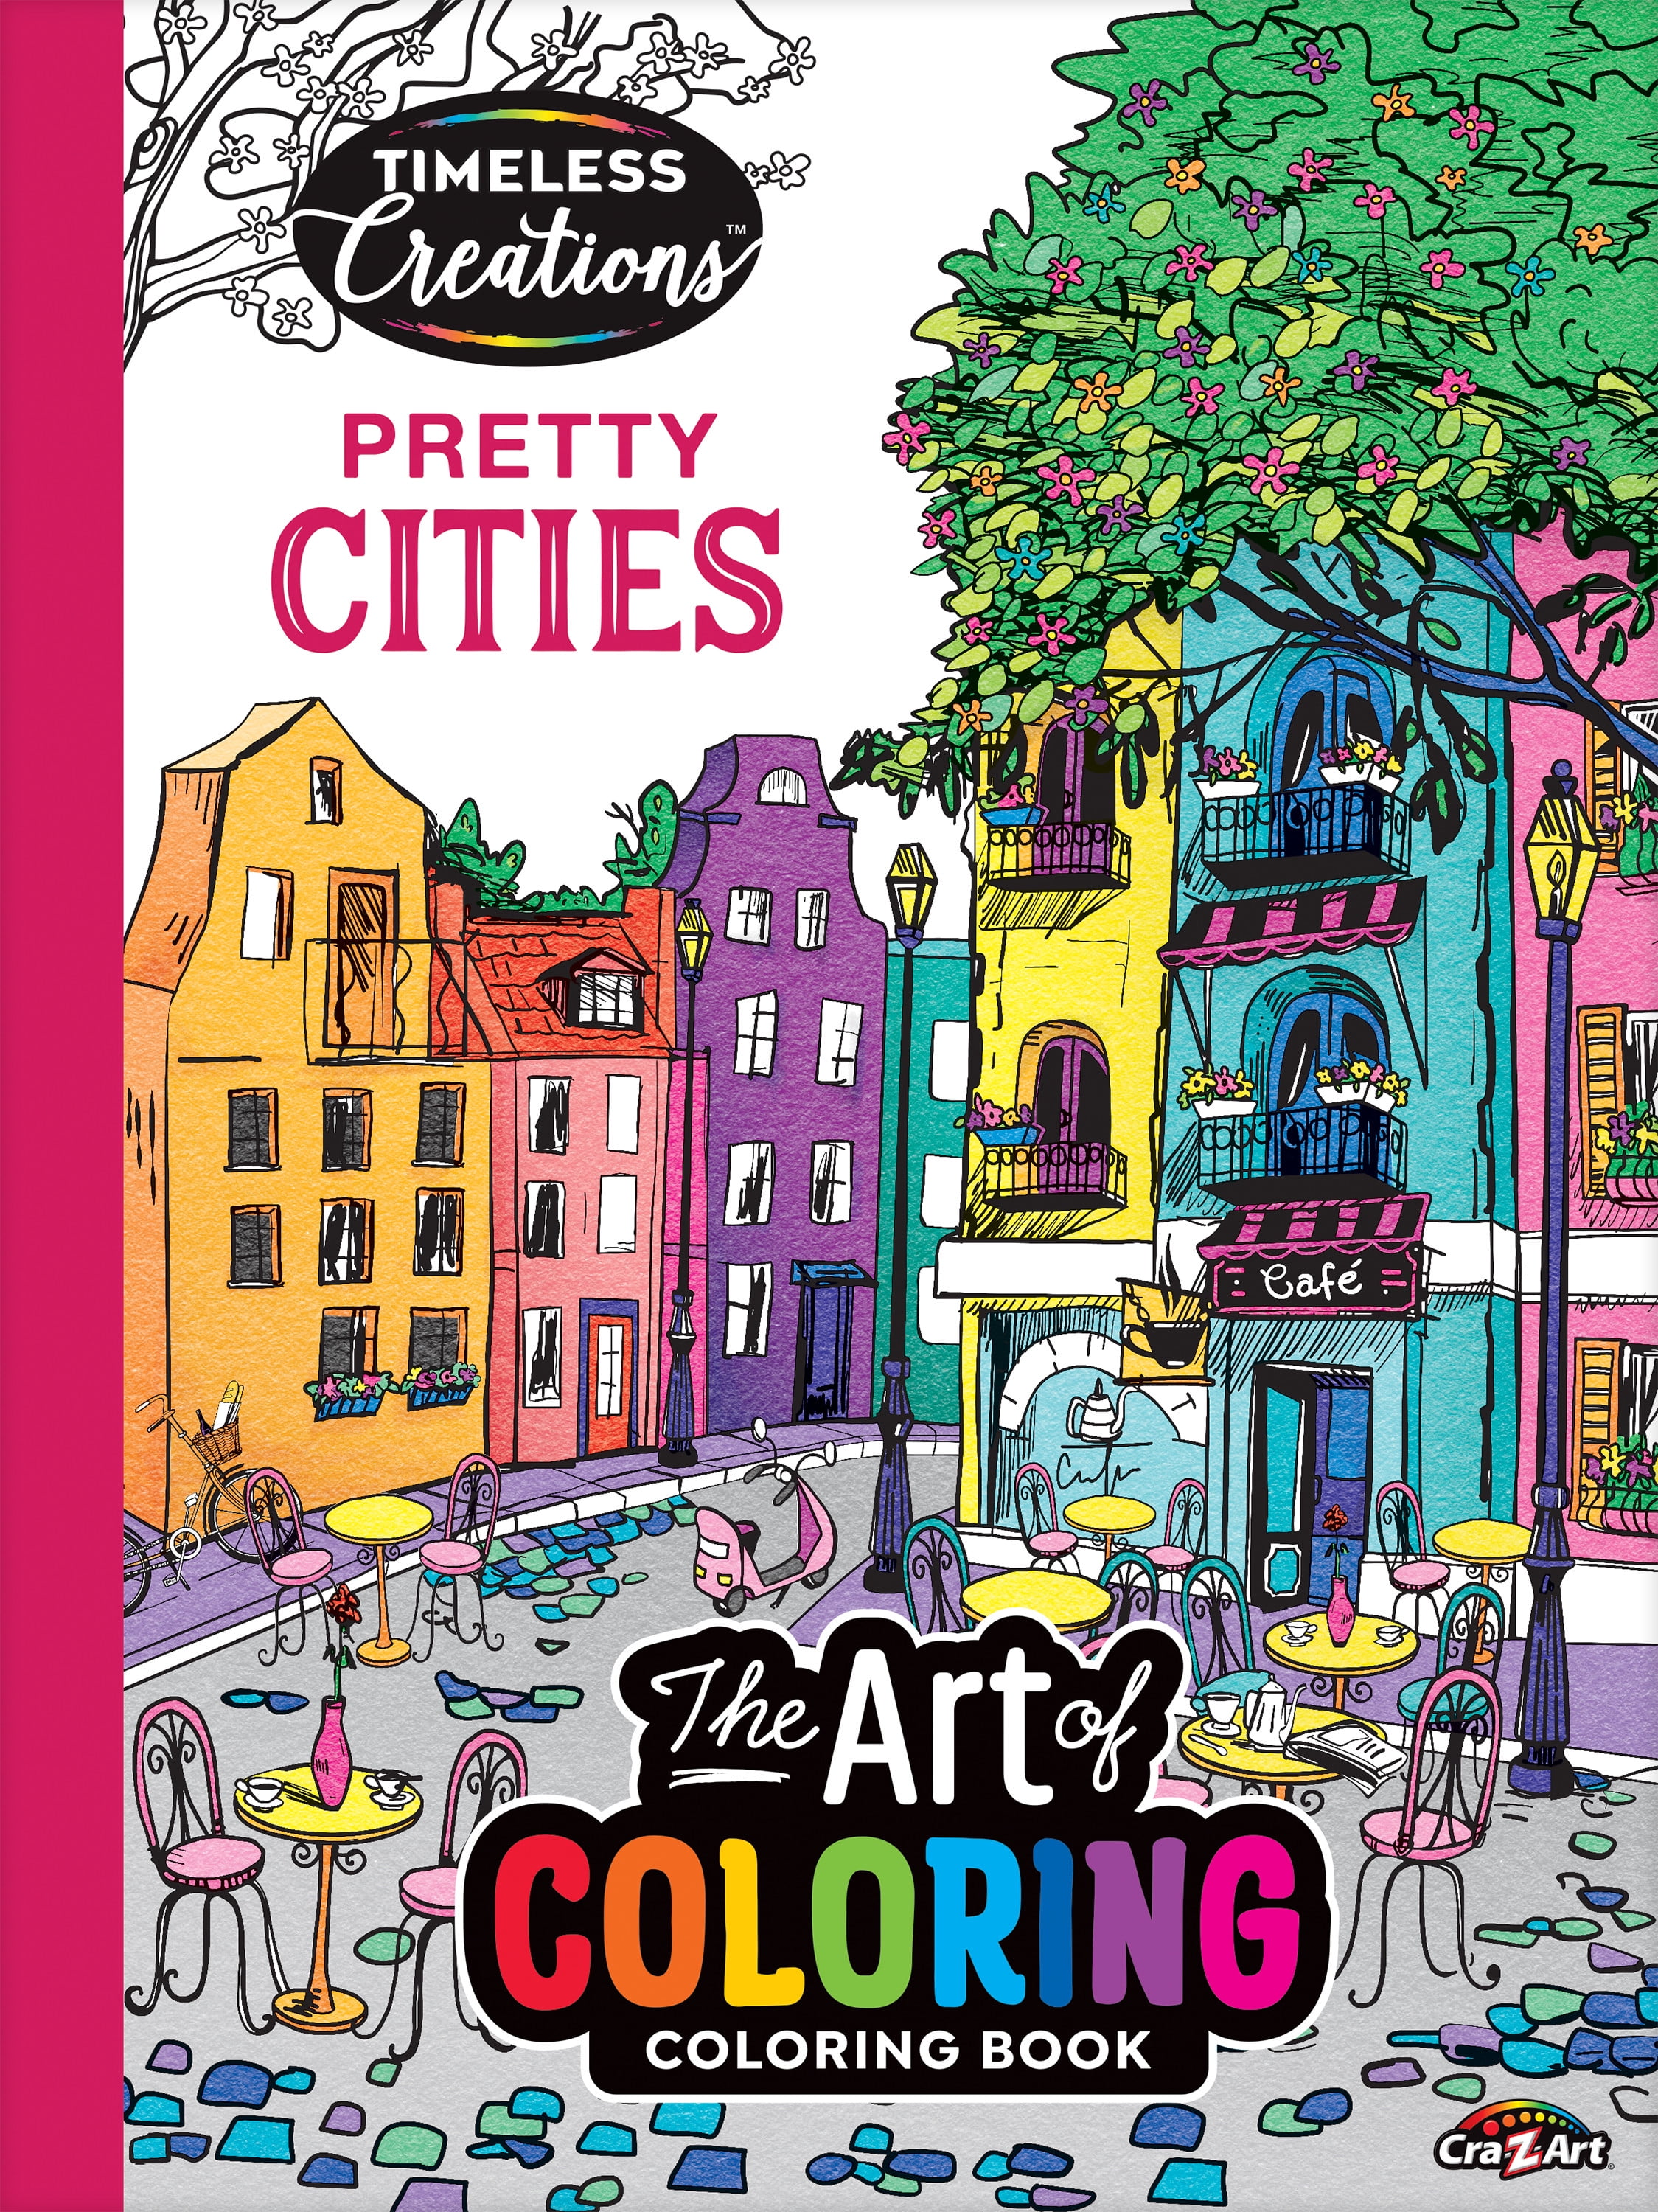 Cra-Z-Art: Timeless Creations, Pretty Cities New Adult Coloring Book, 64 Pages, Easter Gift